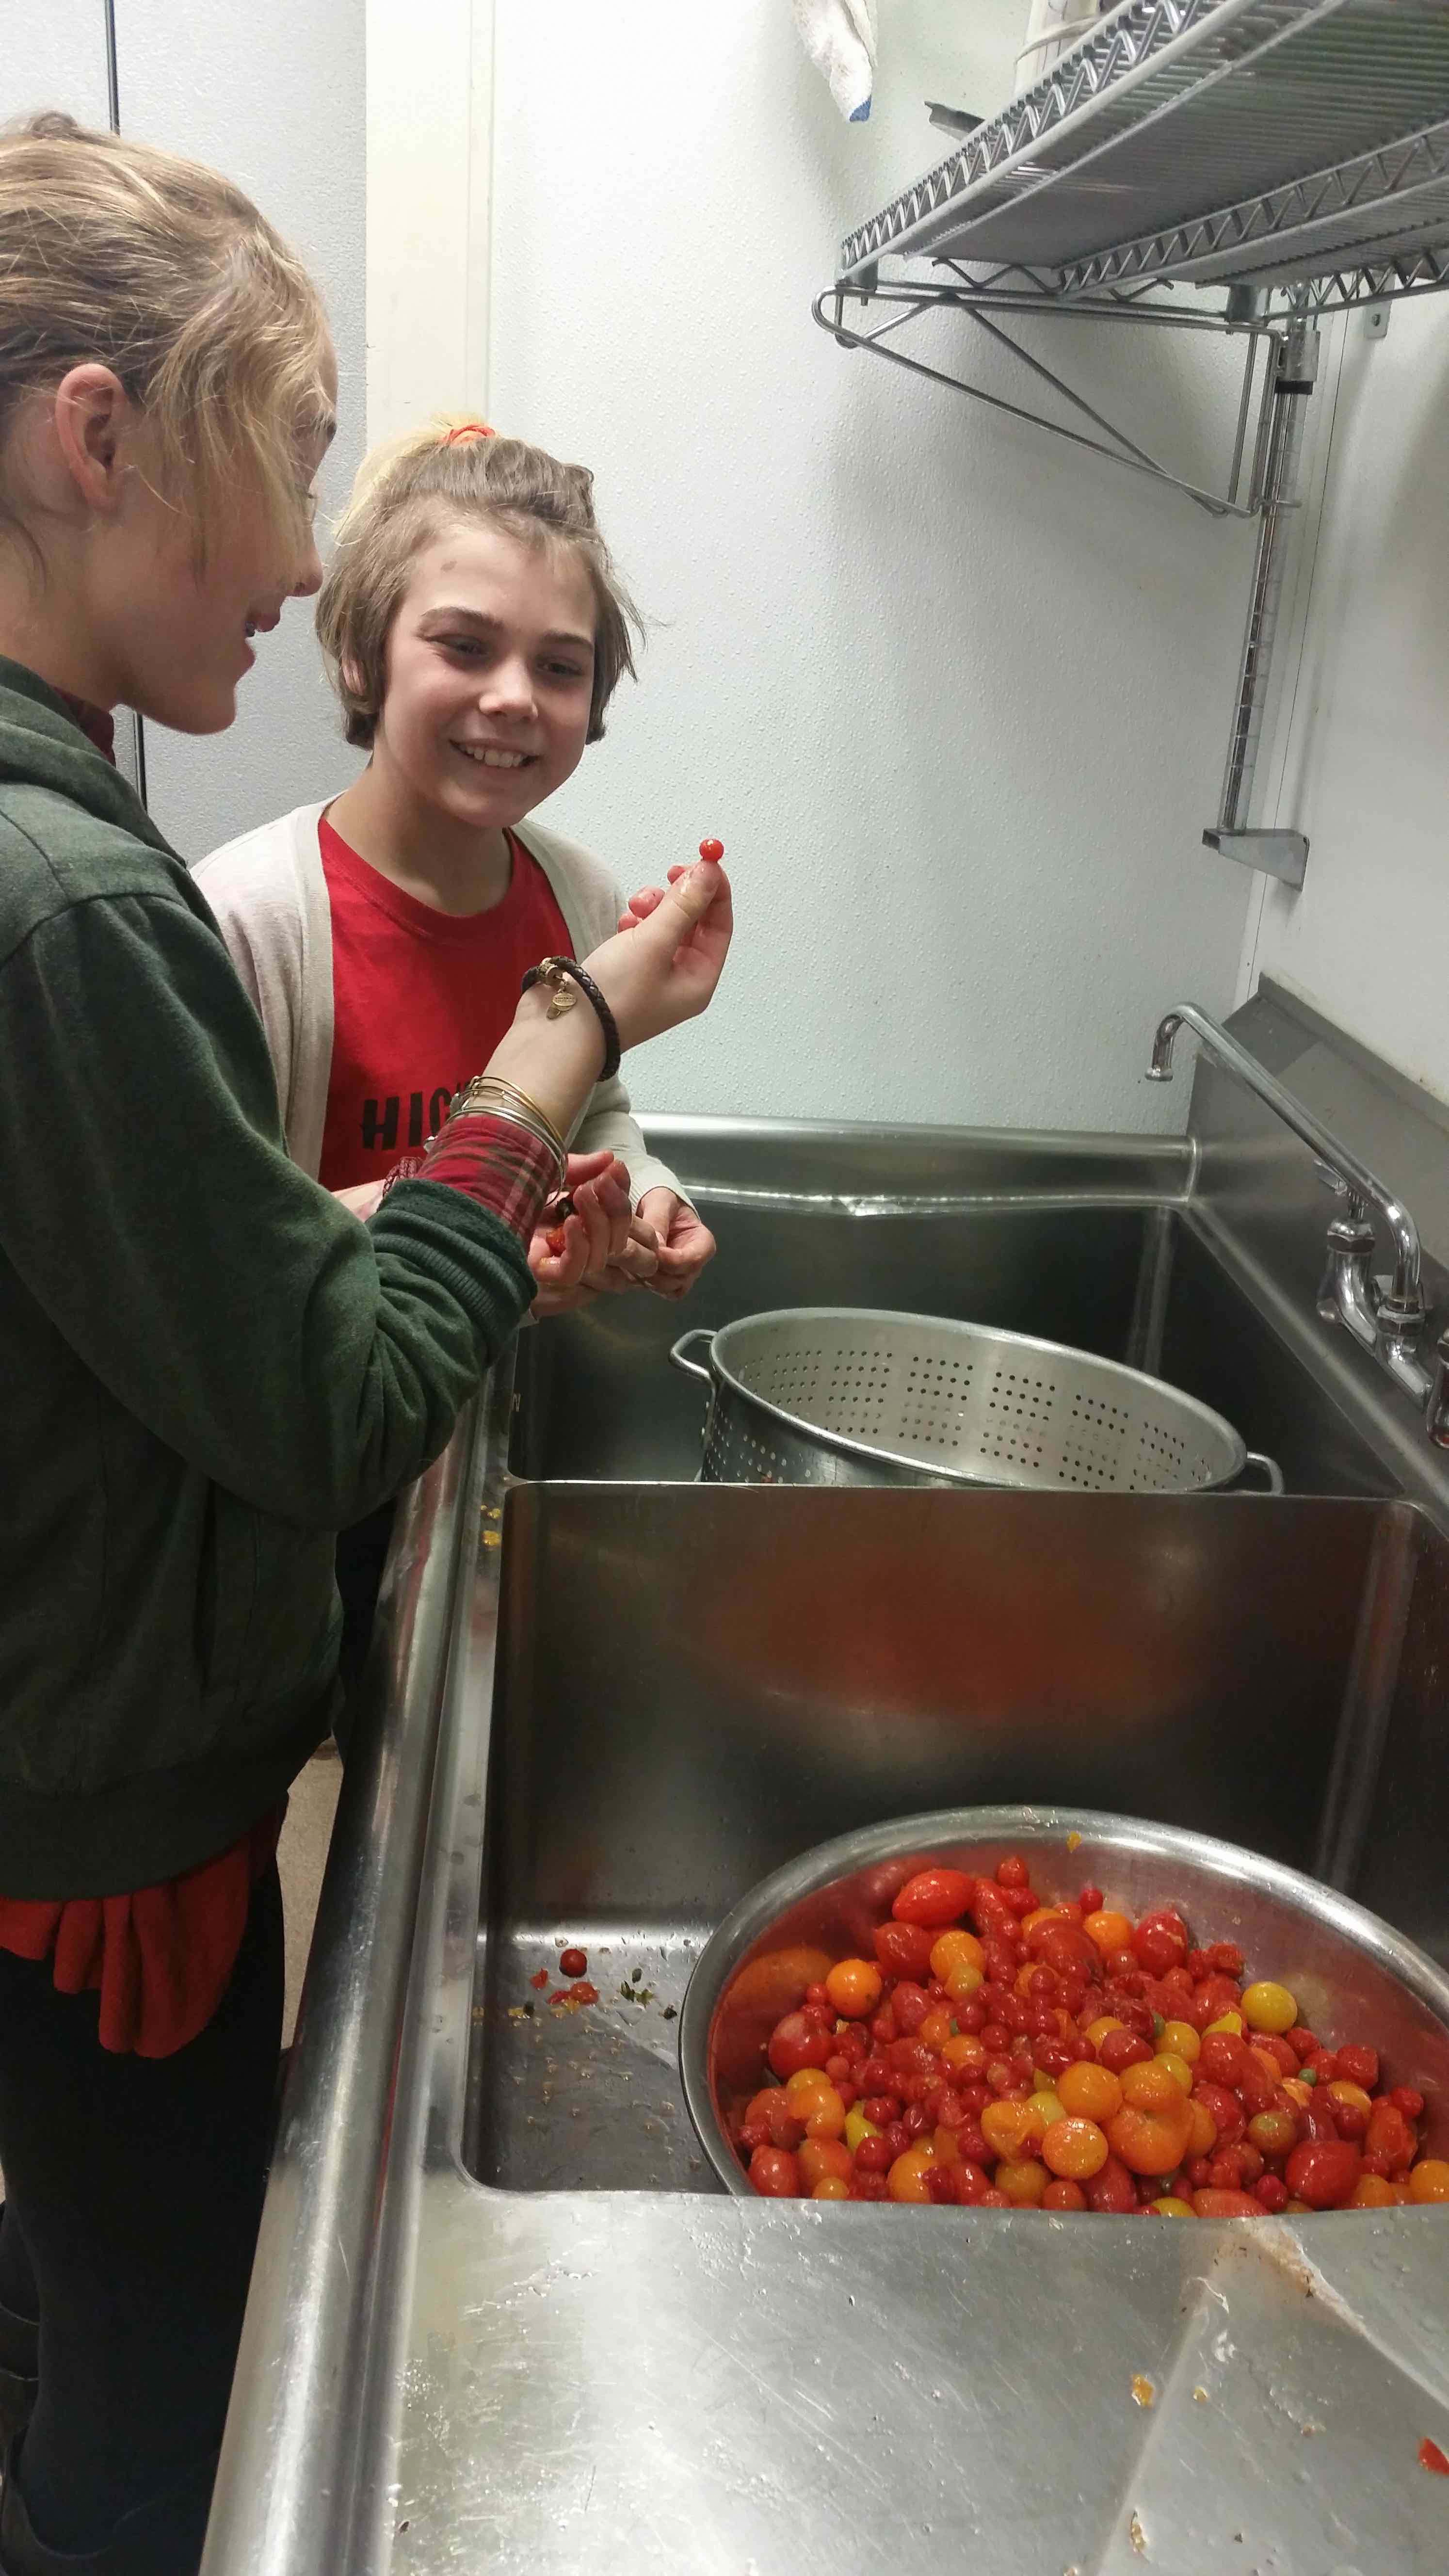 Ridge and Valley Charter School student eva cleaning tomatoes at soup kitchen